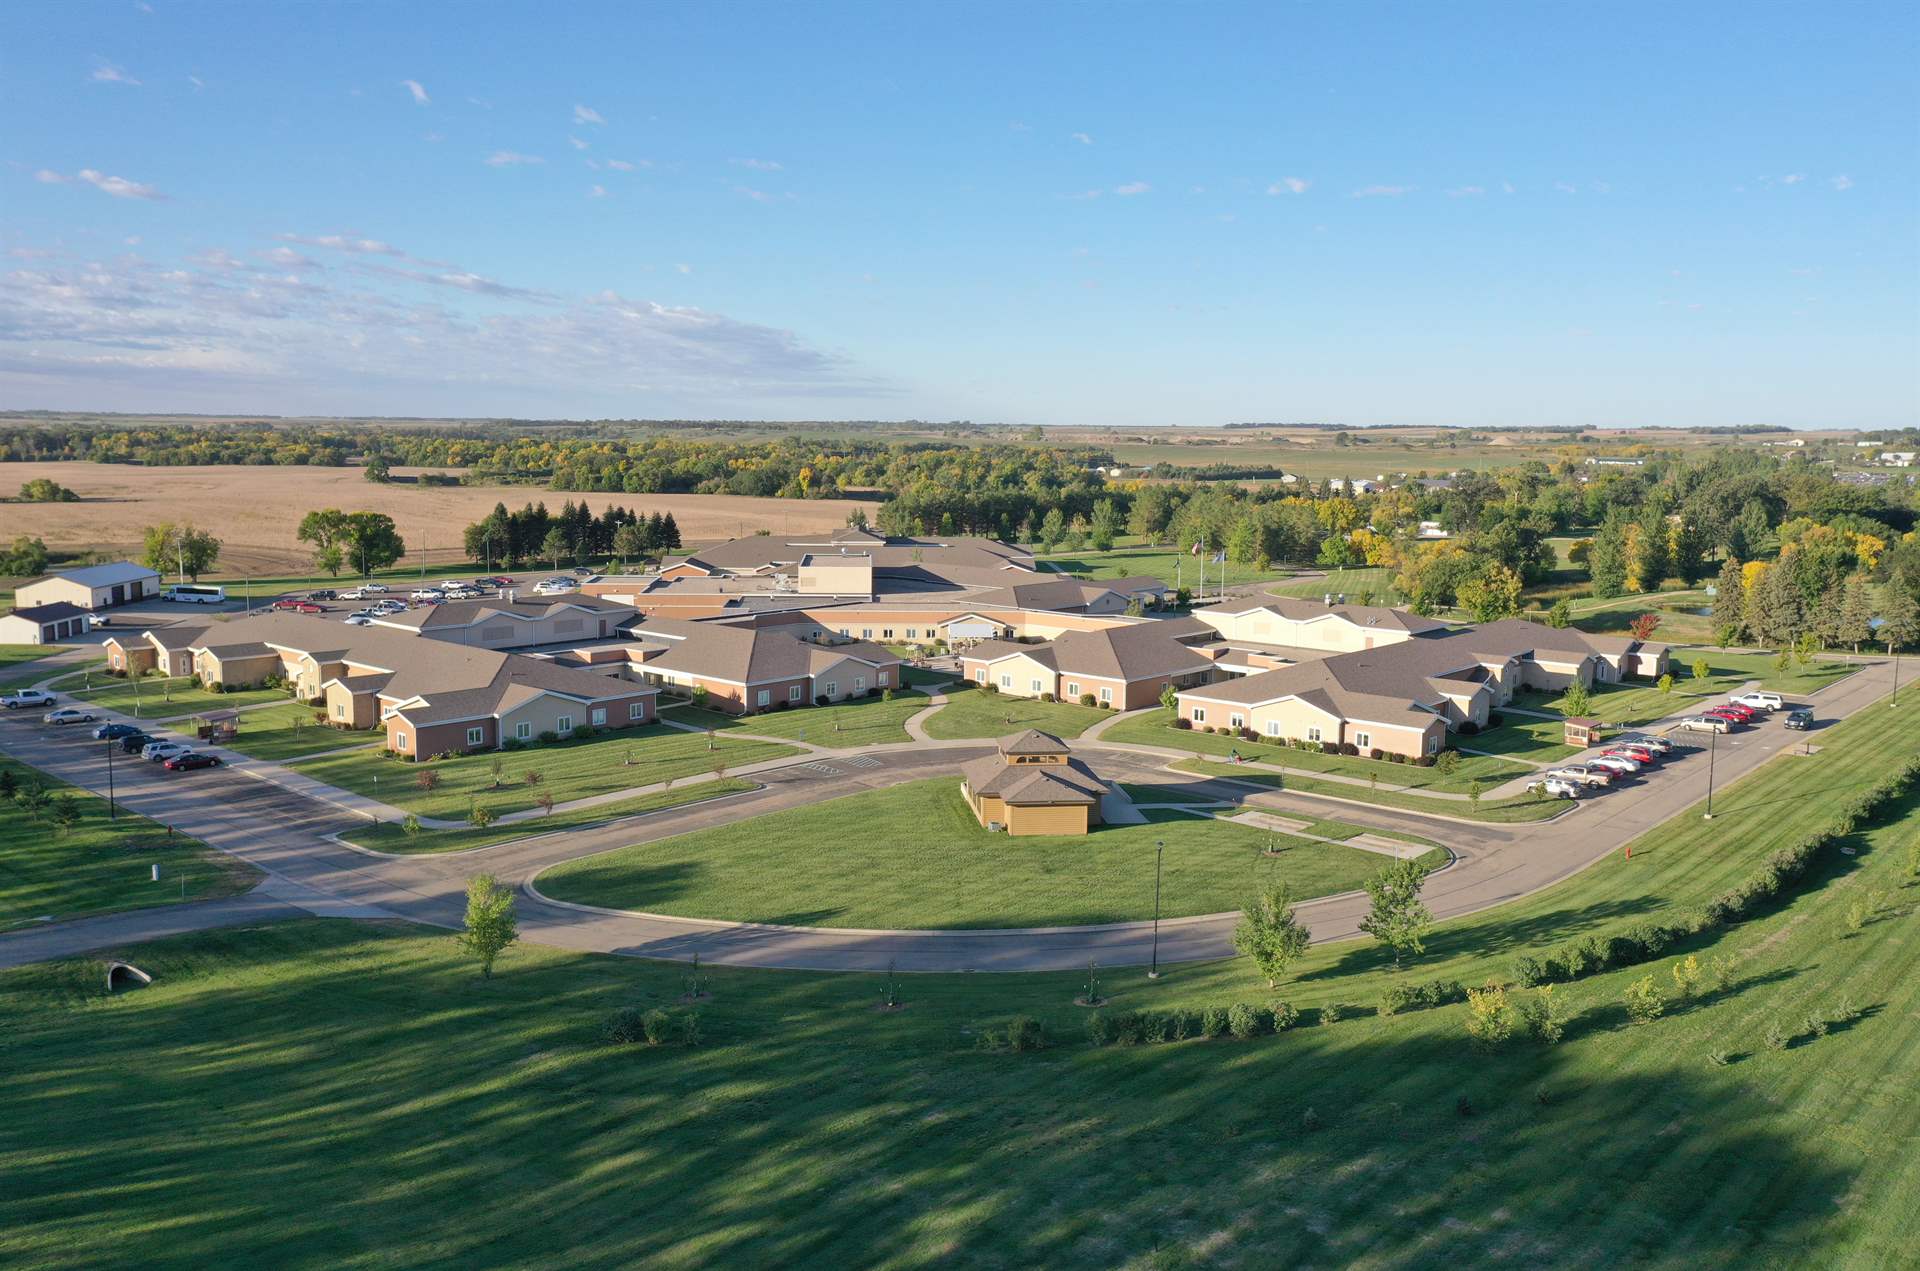 The back of the North Dakota Veterans Home campus.